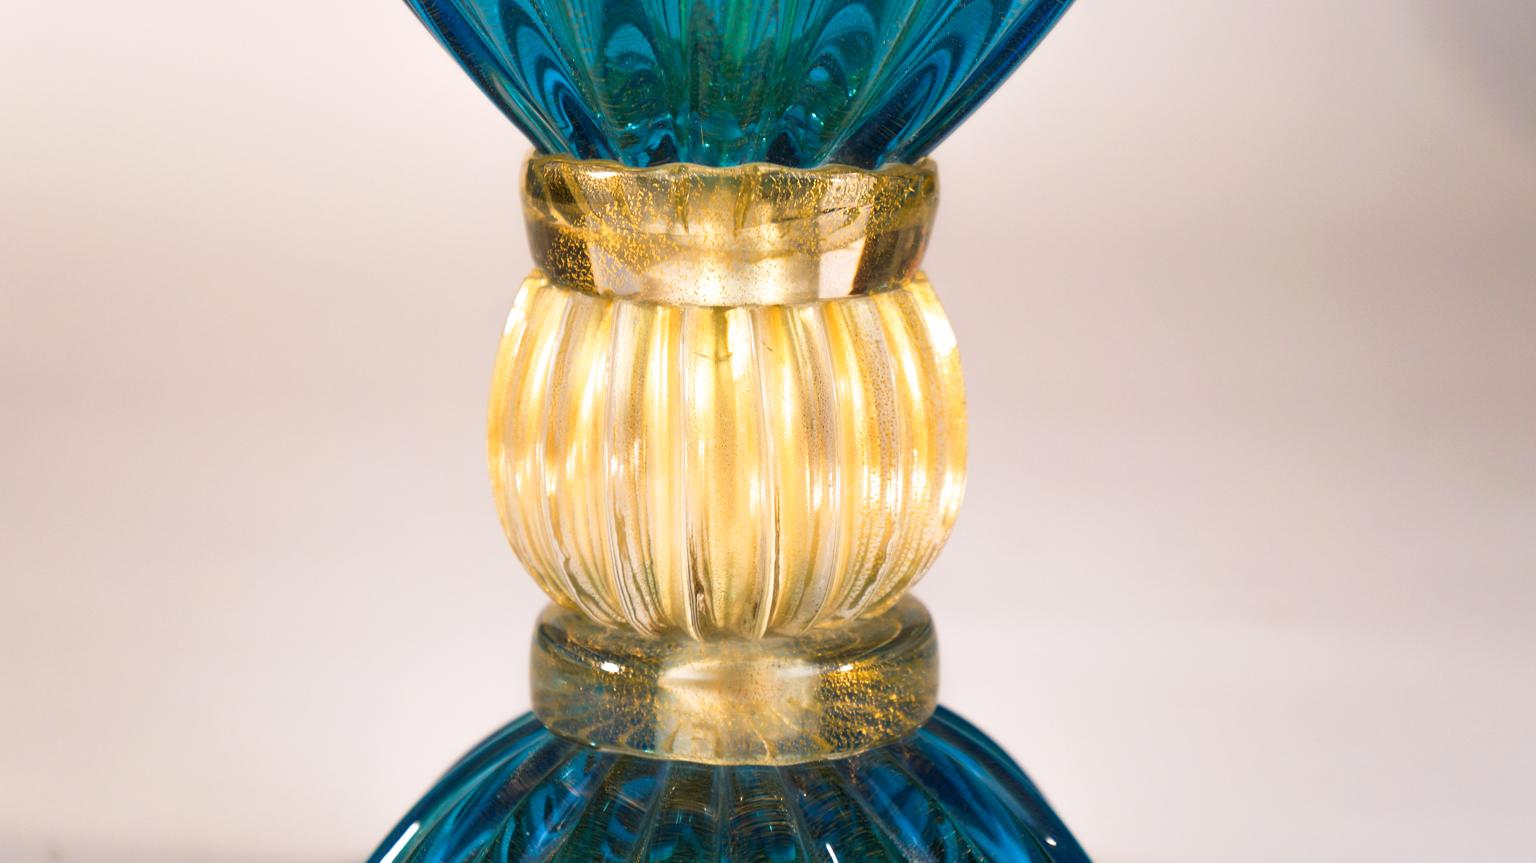 Alberto Donà Pair of Light Blue Italian Murano Glass Table Lamps Veronese, 1980s For Sale 3